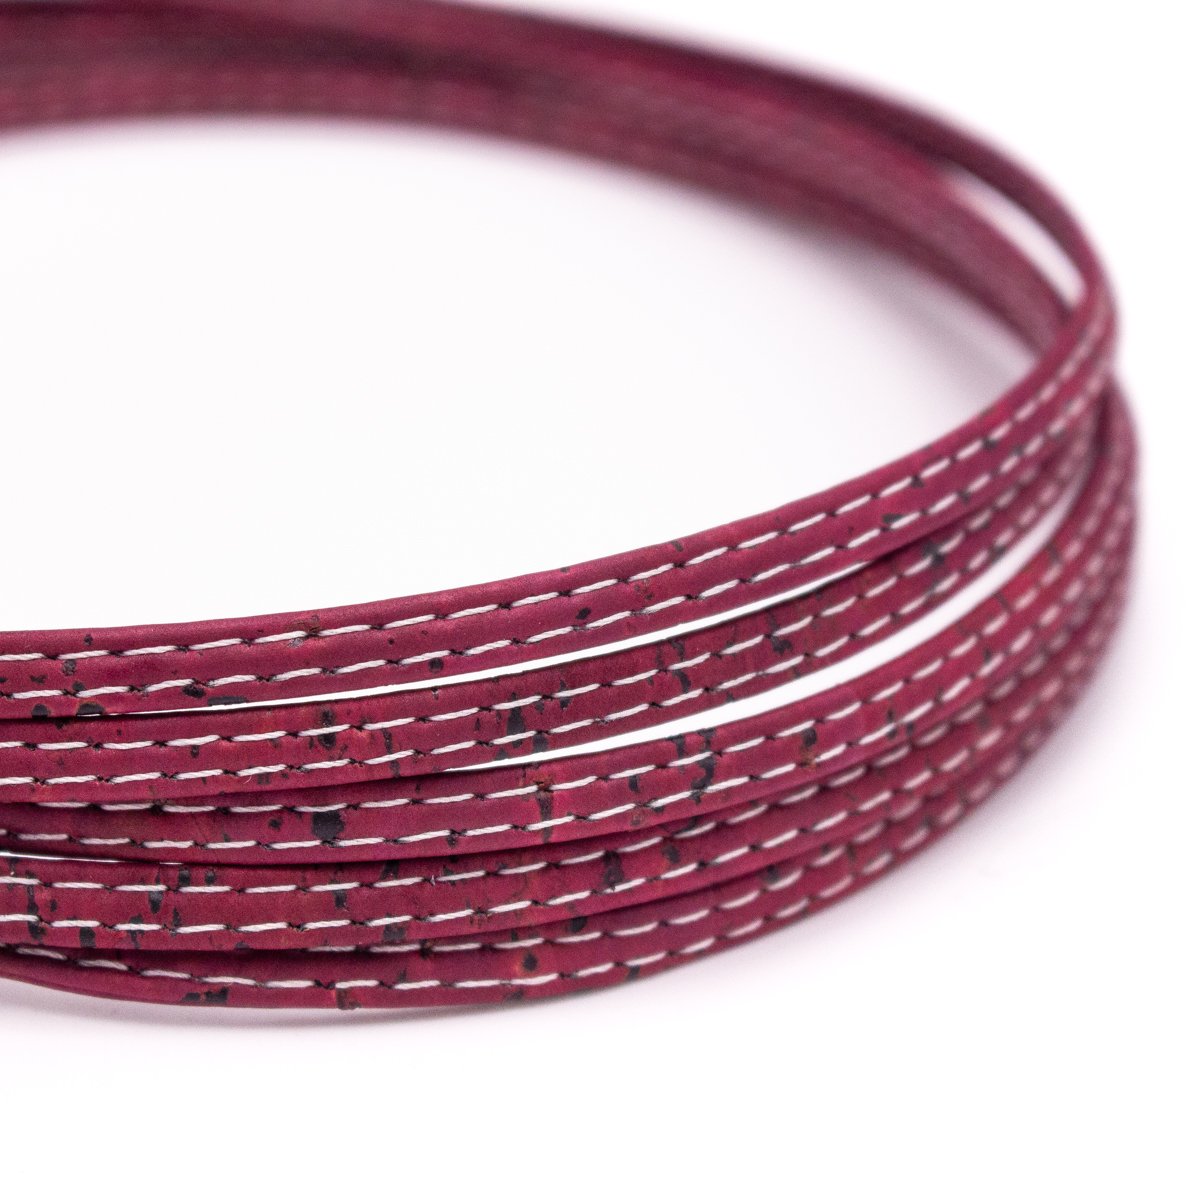 10 meters of Wine Red 5mm Flat Natural Cork Cord COR-518